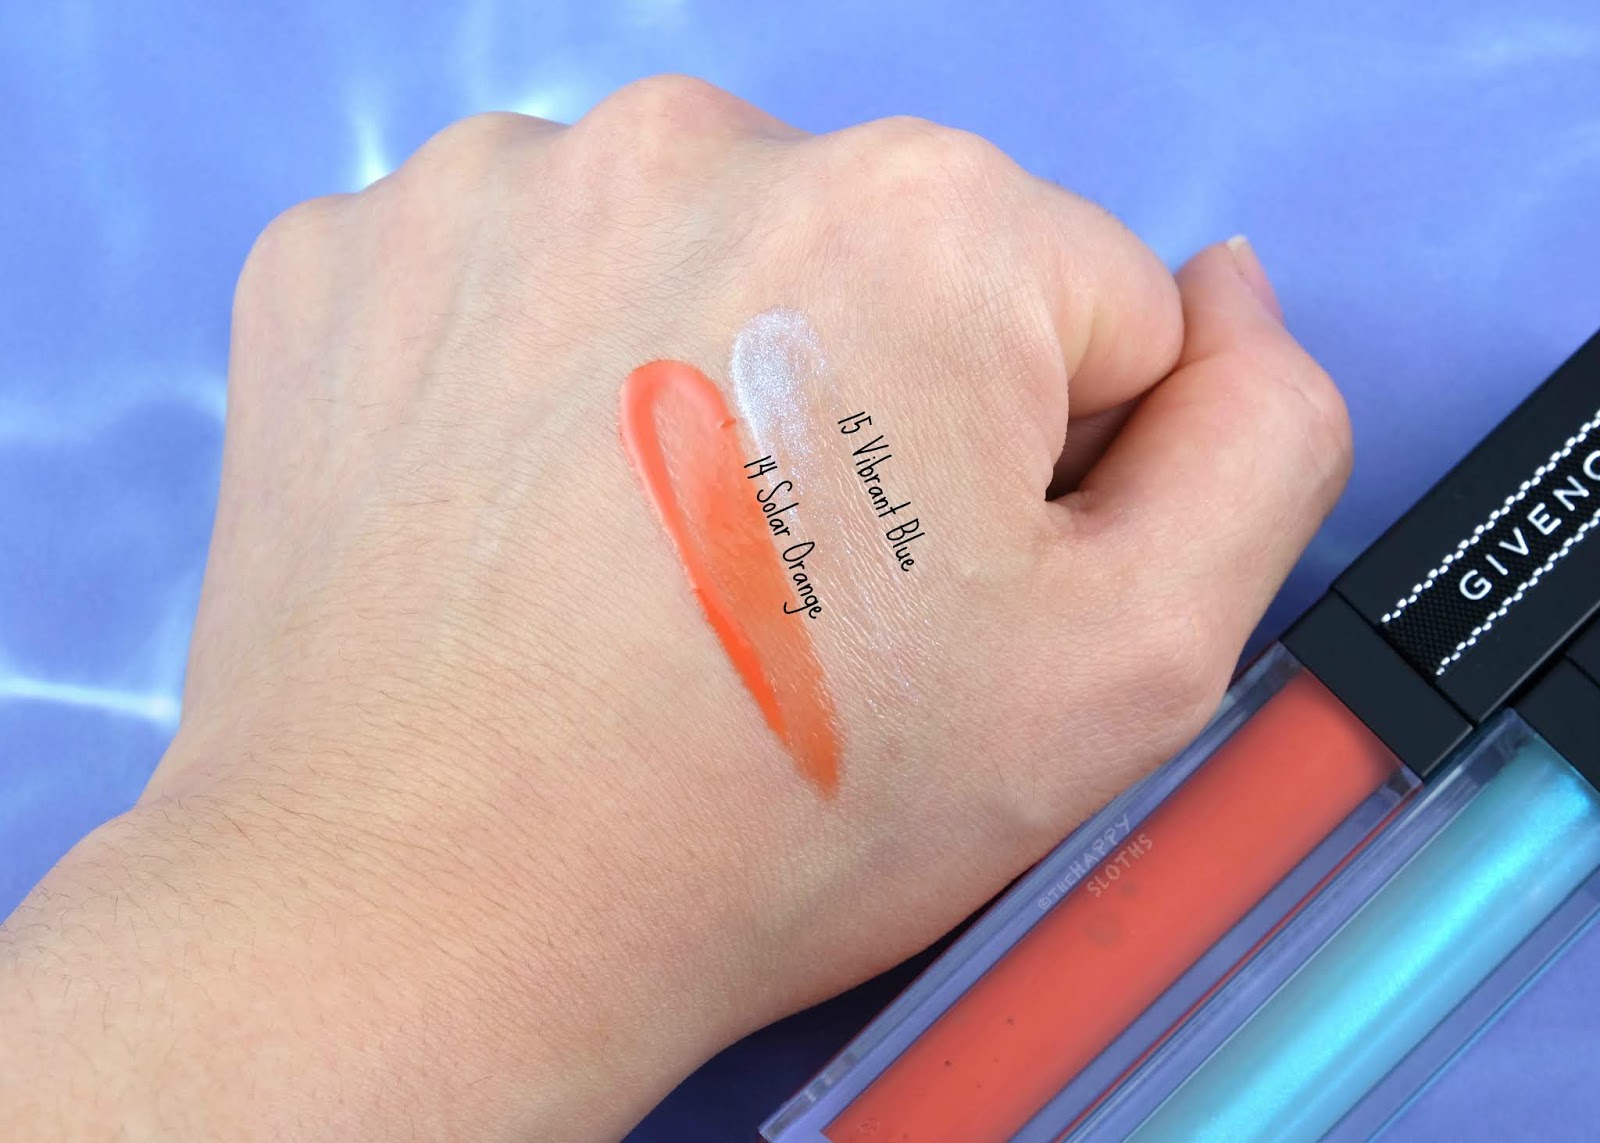 Givenchy | Summer 2019 Gloss Interdit Vinyl in "14 Solar Orange" & "15 Vibrant Blue": Review and Swatches